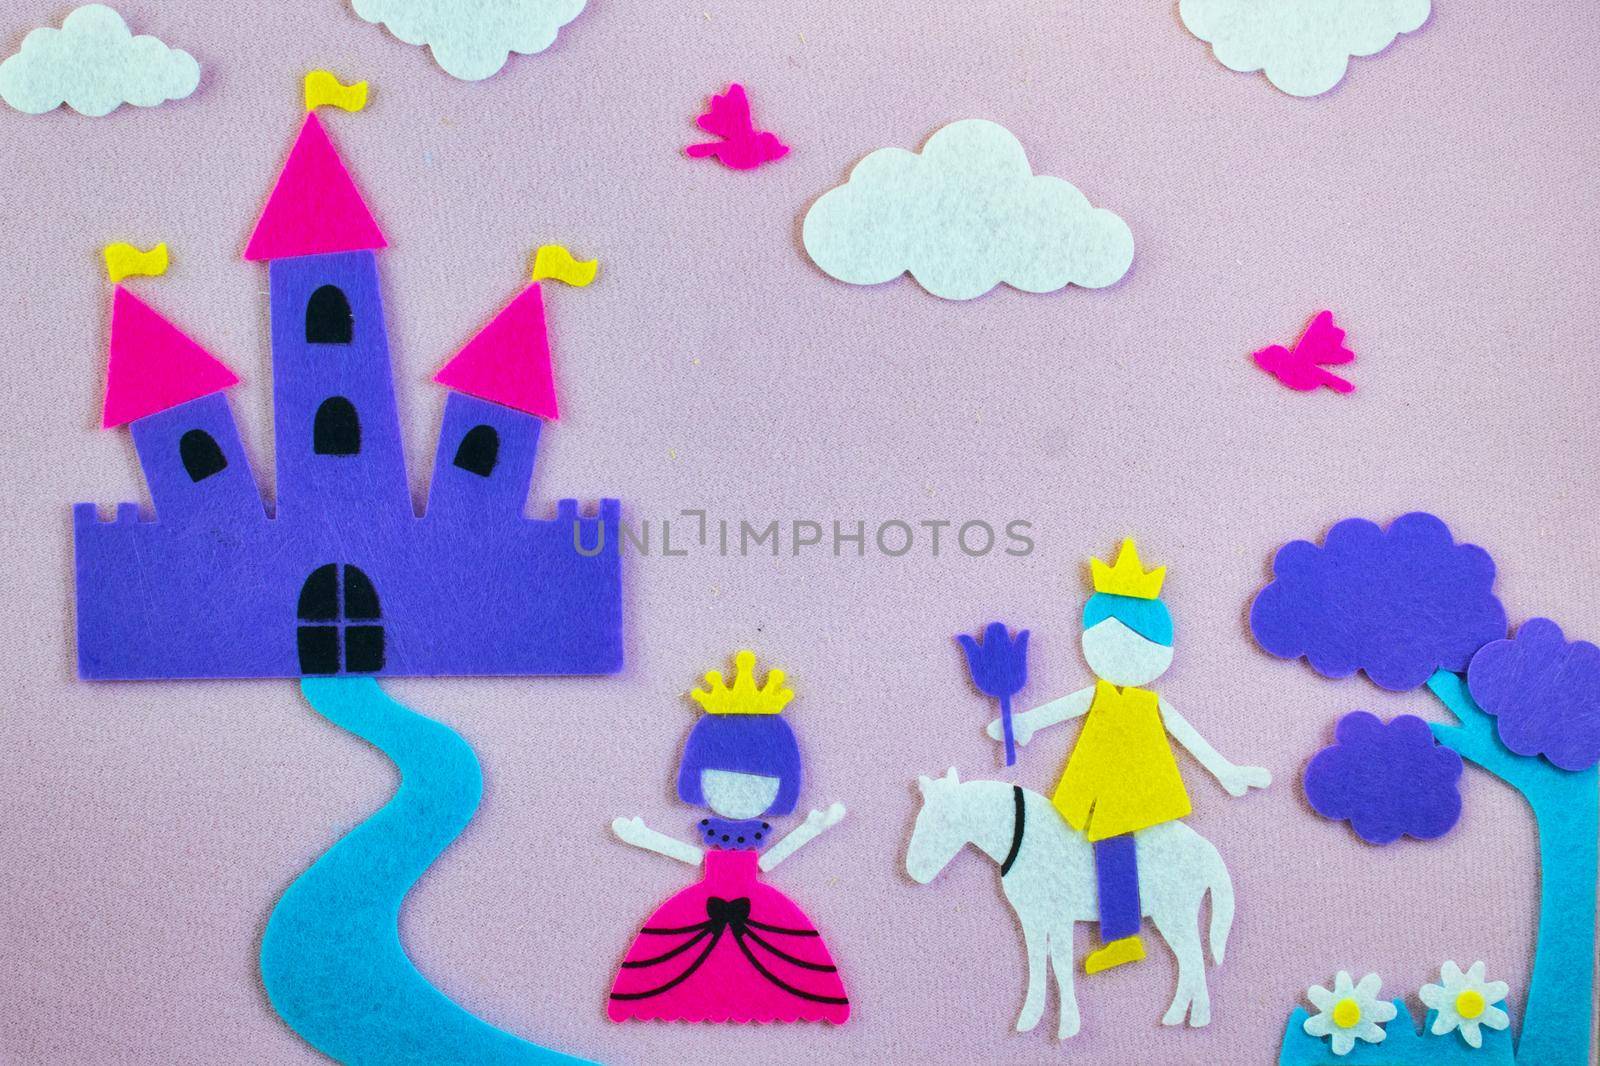 Cute fairy tale scene in felt with a princess and a prince in love in front of a fantasy castle by tennesseewitney